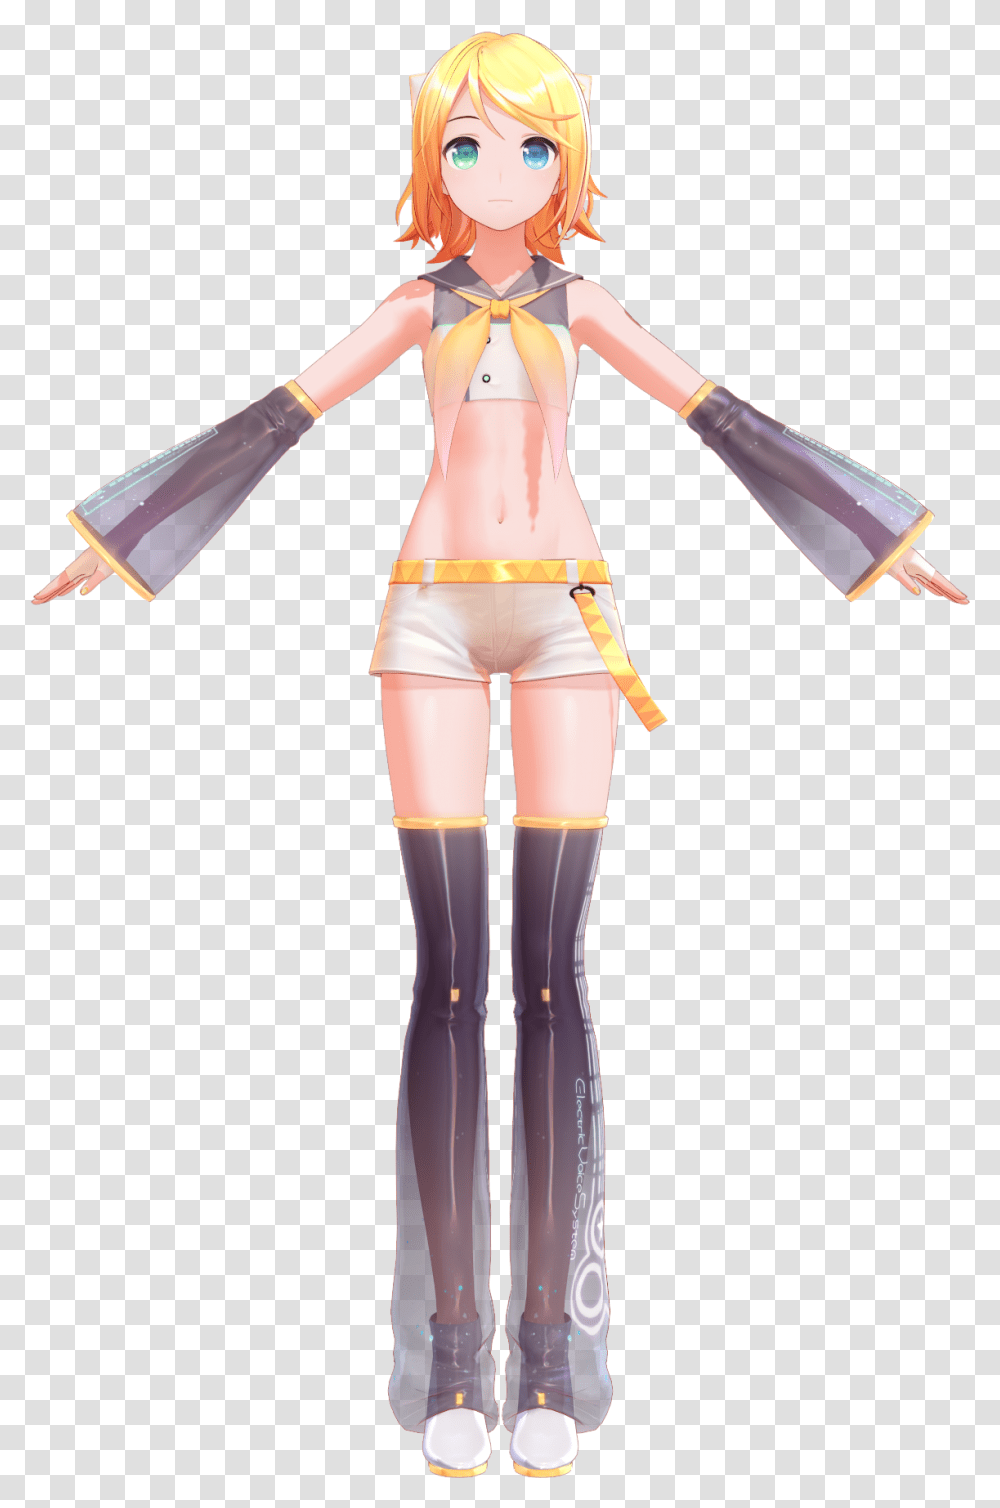 Rin Kagamine 10th Anniversary Model By Yyb Download Cartoon, Costume, Person, Performer Transparent Png